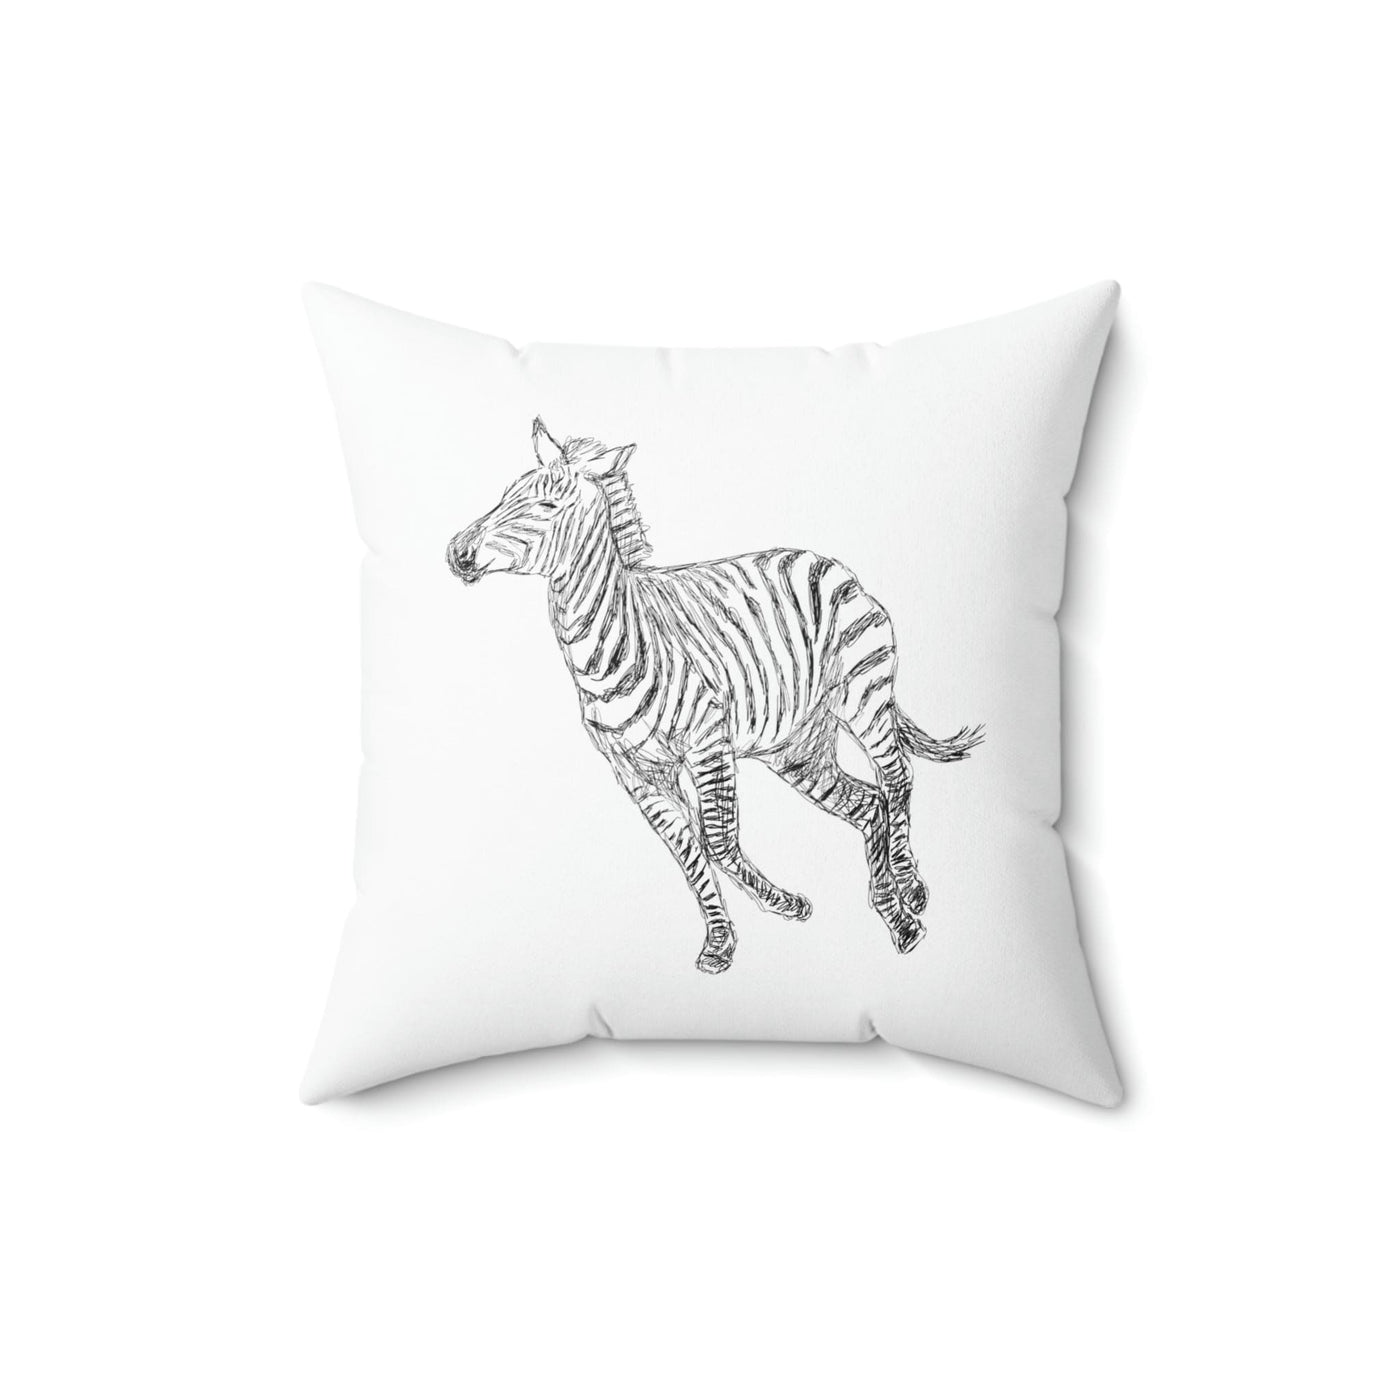 Throw Pillow Cover Galloping Zebra Line Art Drawing Print 2 - sided Print